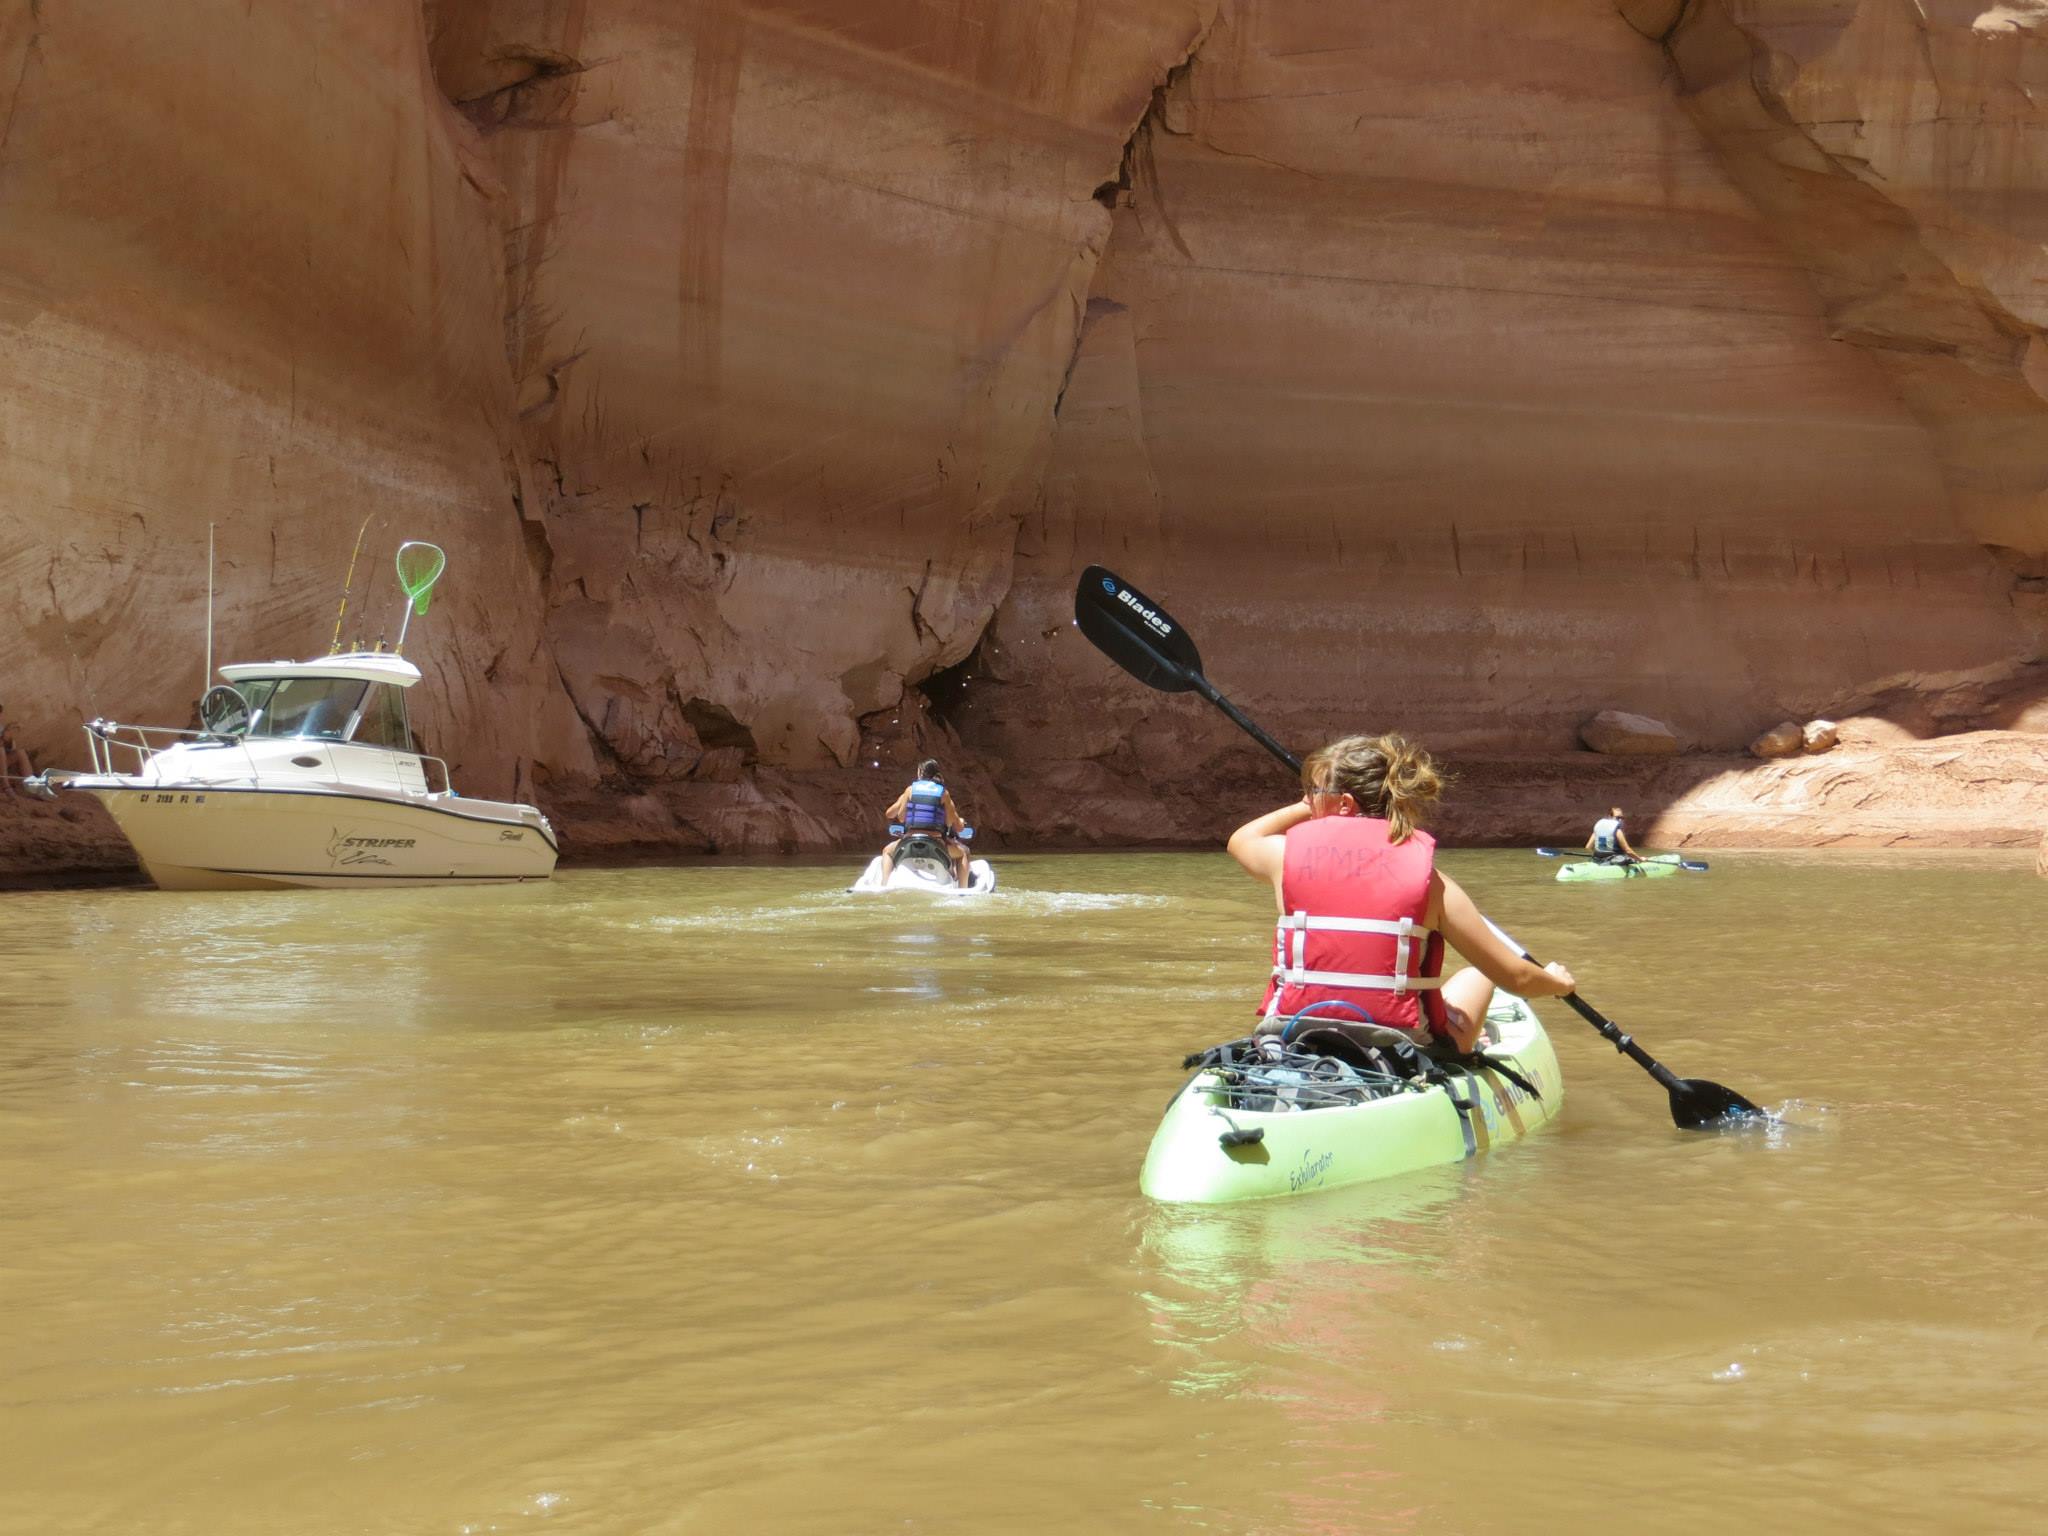 Kayaker, motorboats on a lake in a sandstone canyon